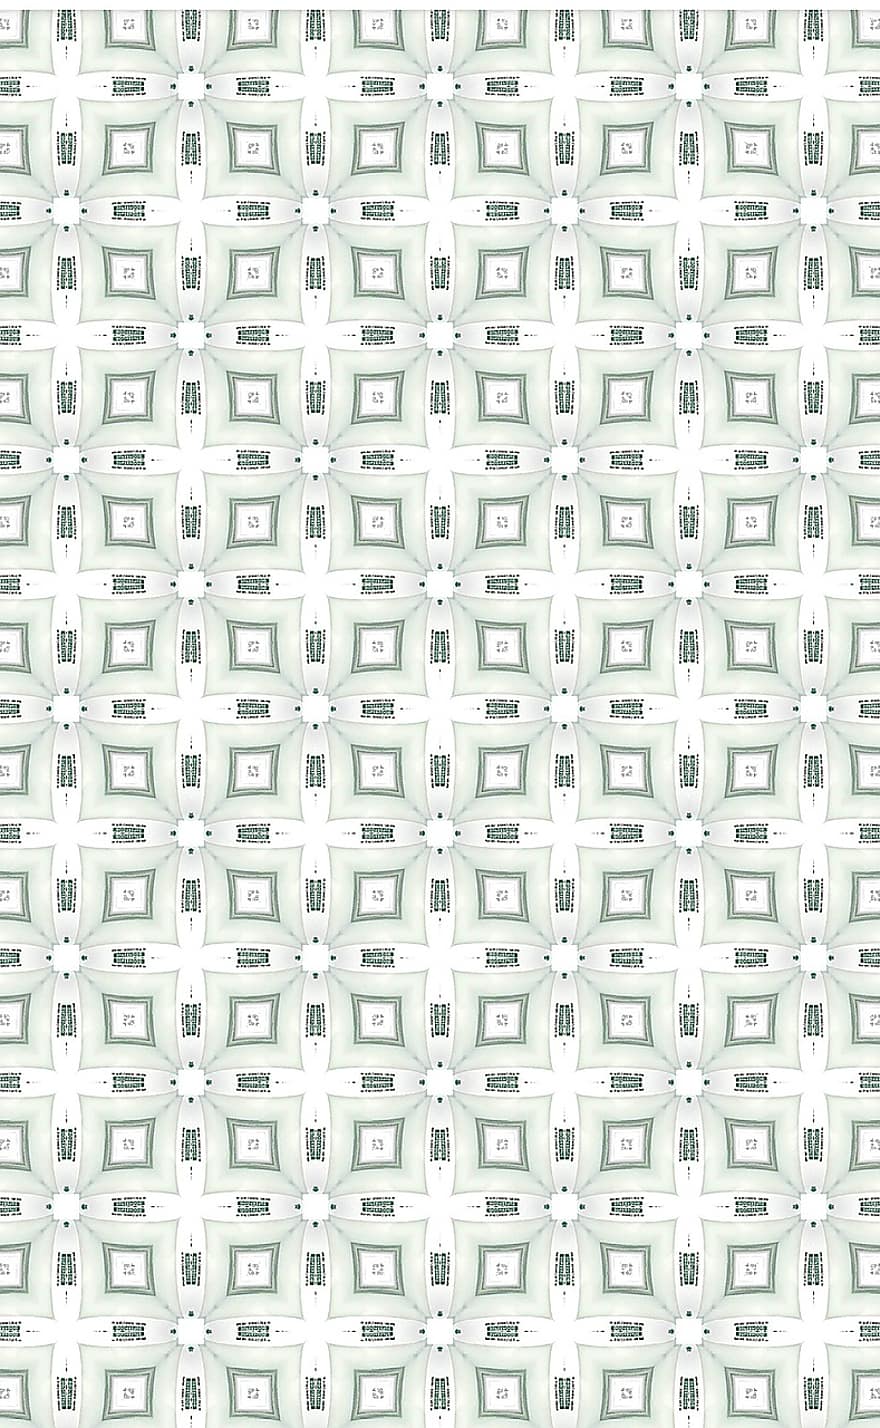 Background, Pattern, Retro, Vintage, Wallpaper, Texture, Design, Abstract, Decoration, Seamless Pattern, Textile